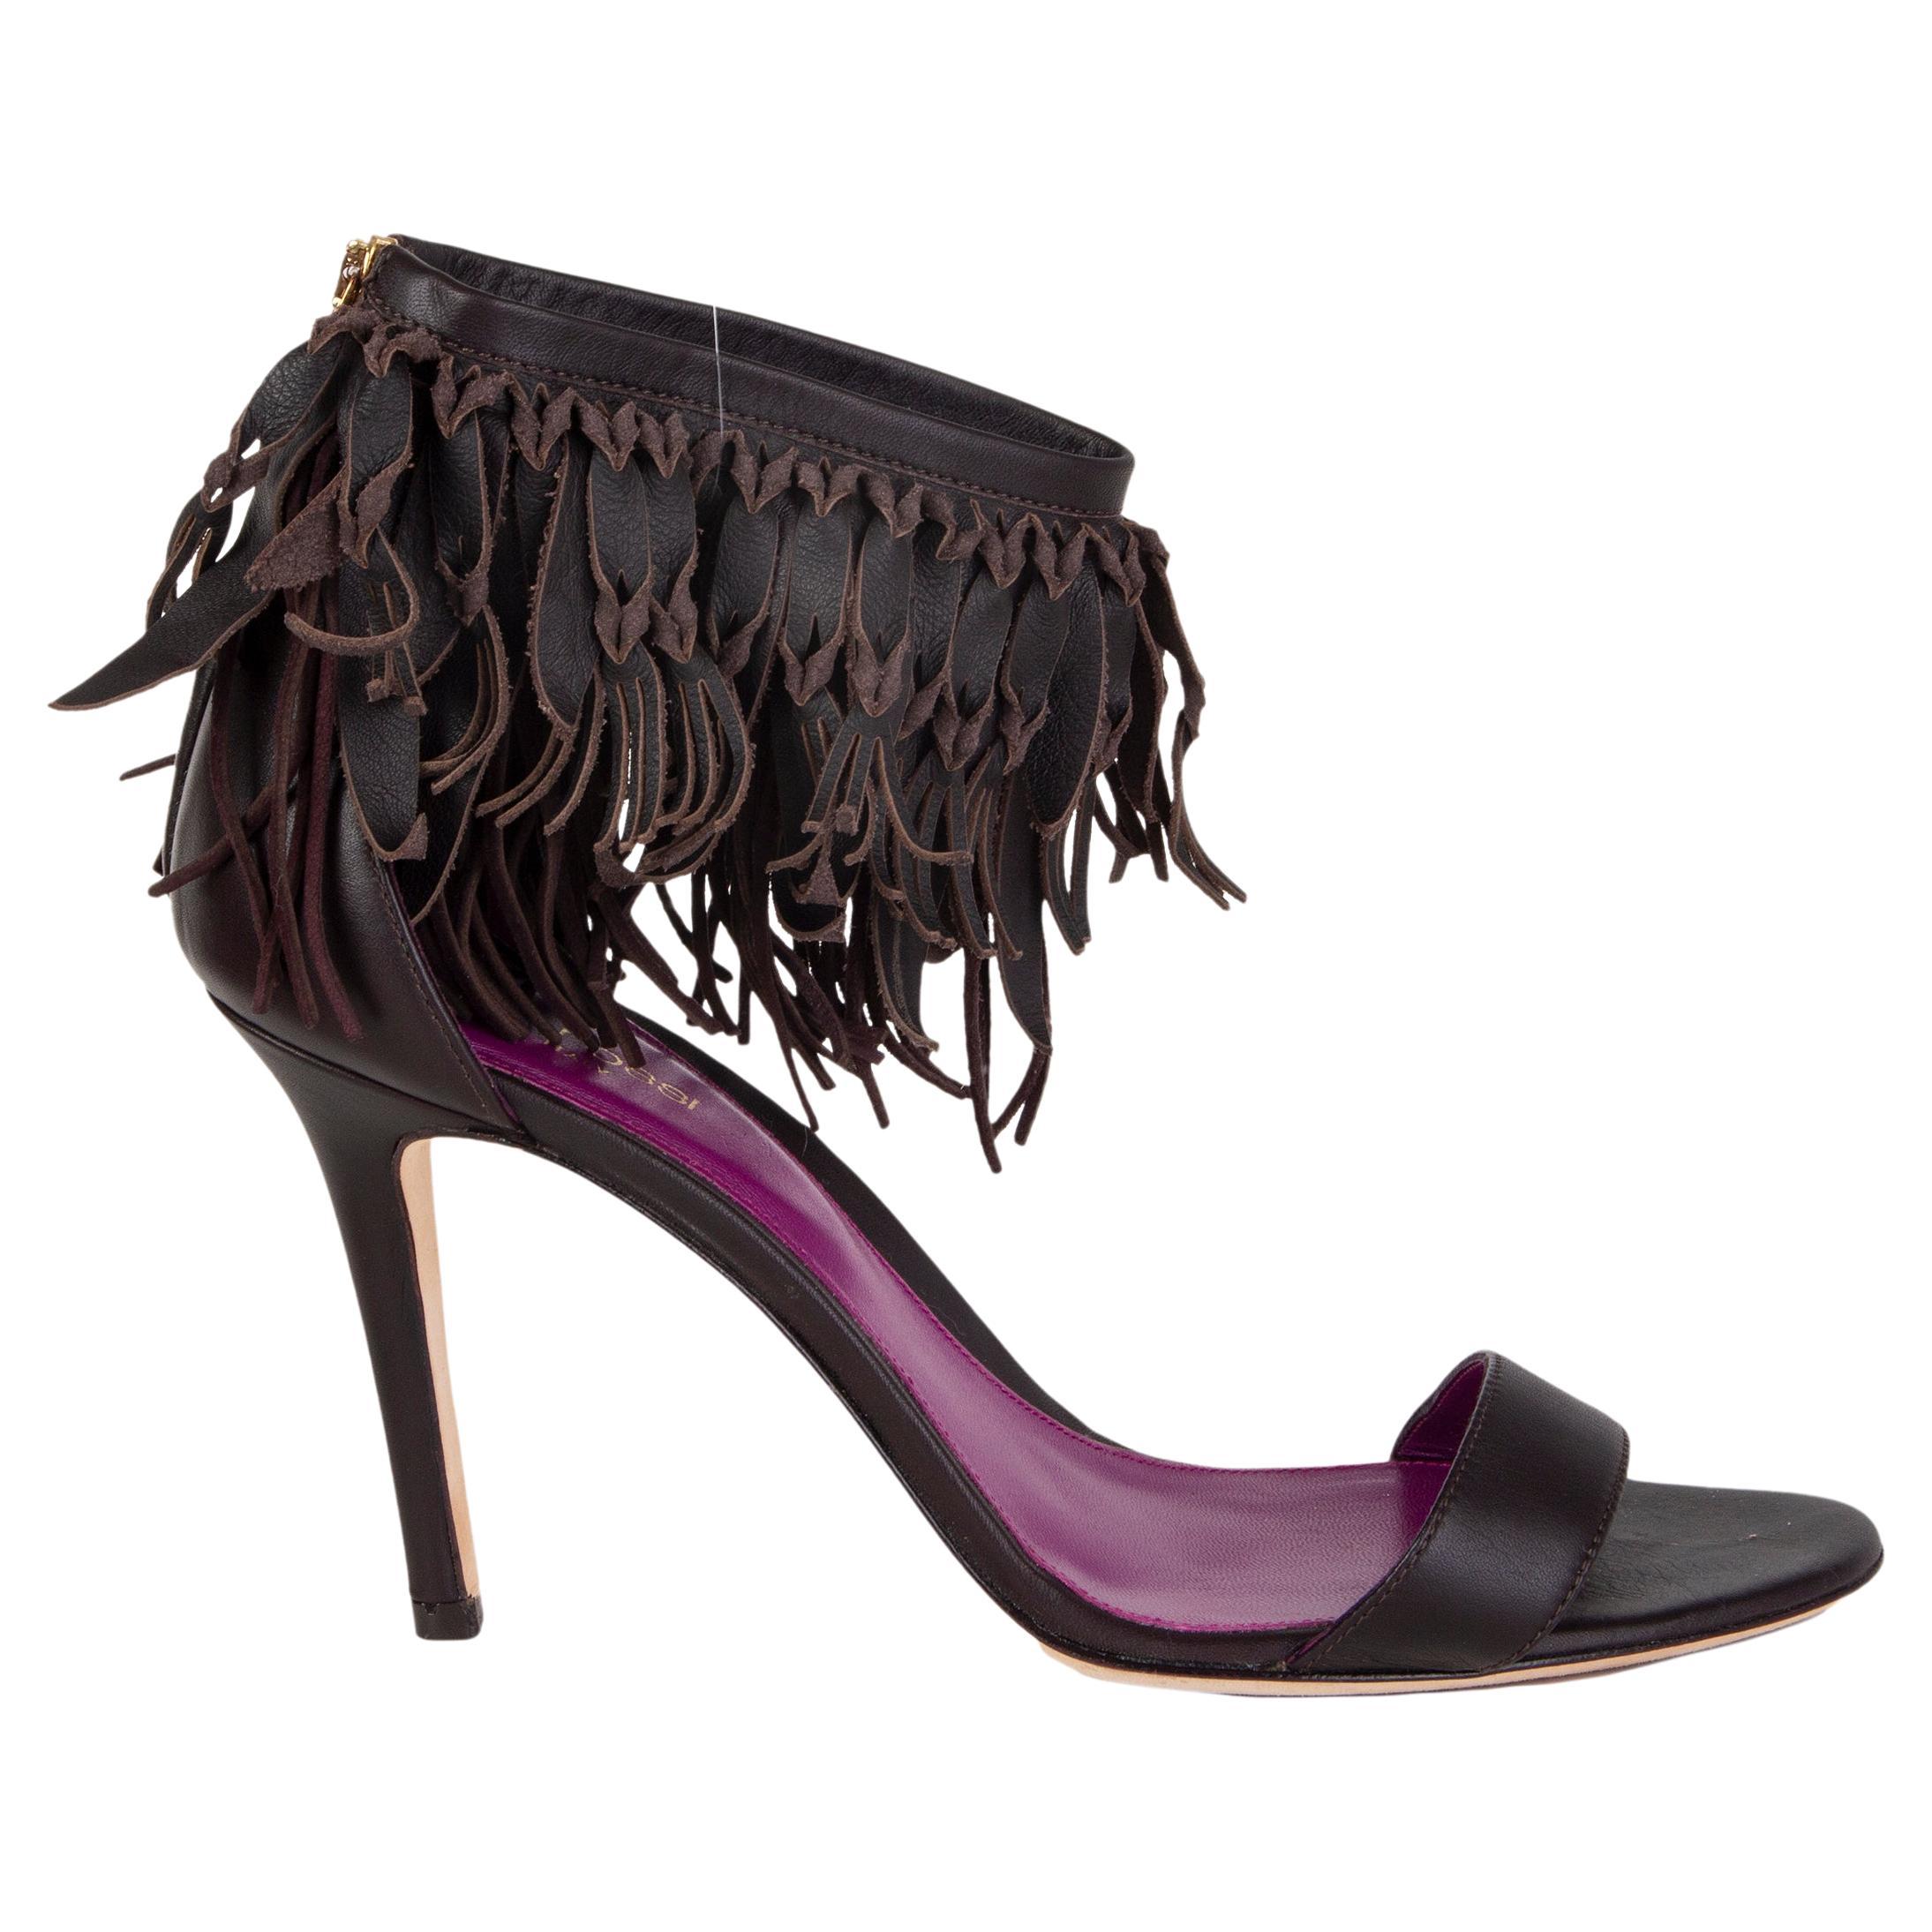 SERGIO ROSSI dark brown leather FRINGE ANKLE STRAP Sandals Shoes 38